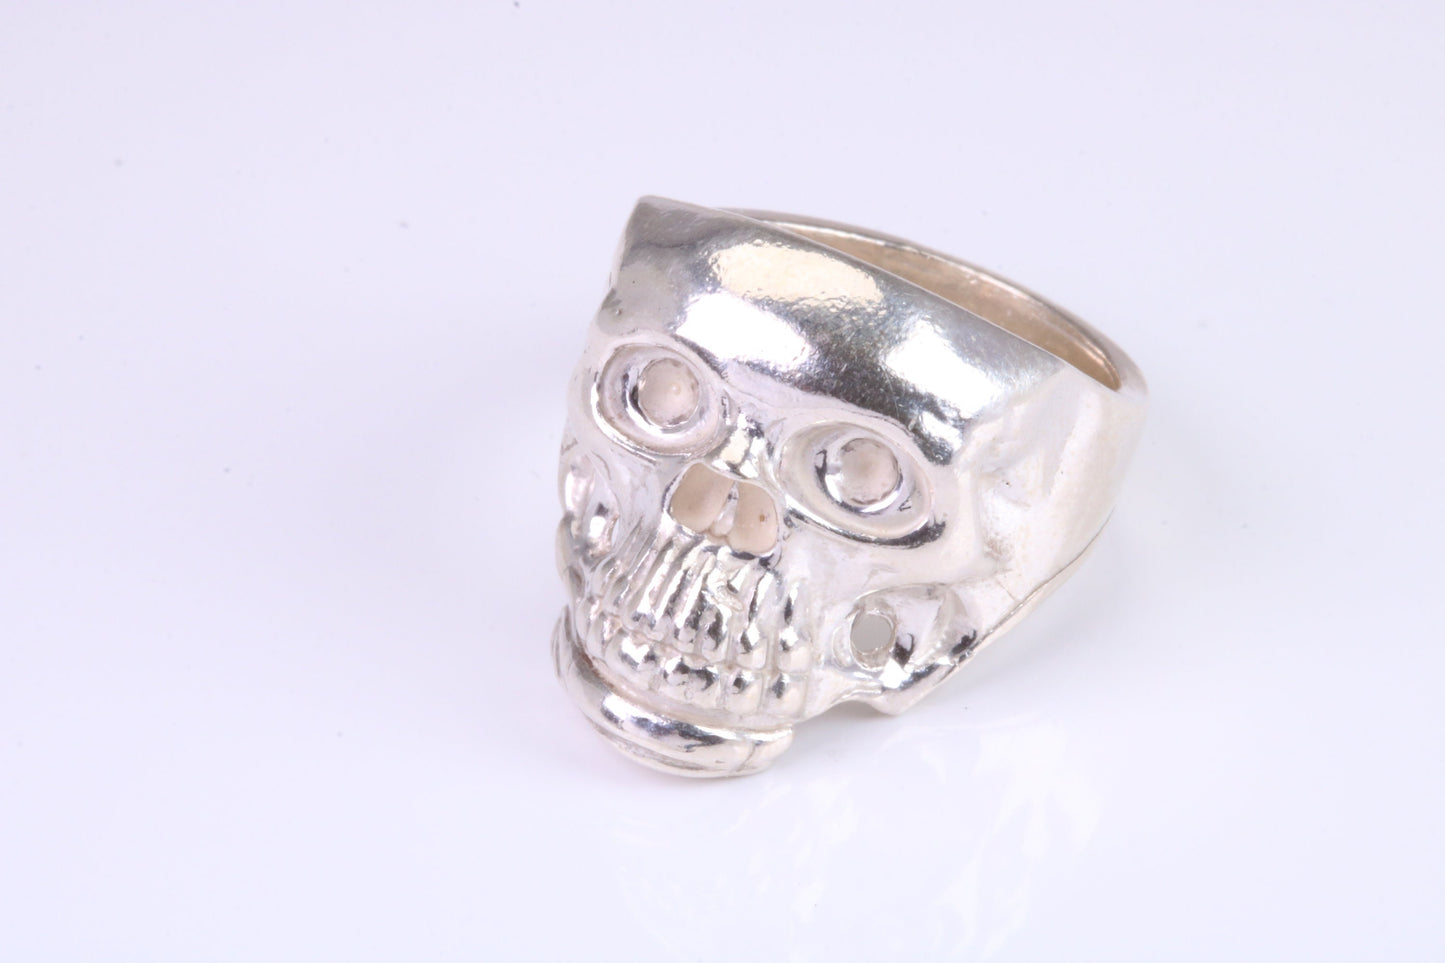 Large and heavy Skull ring,solid sterling silver, perfect for ladies and gents. Available in silver, yellow gold, white gold and platinum